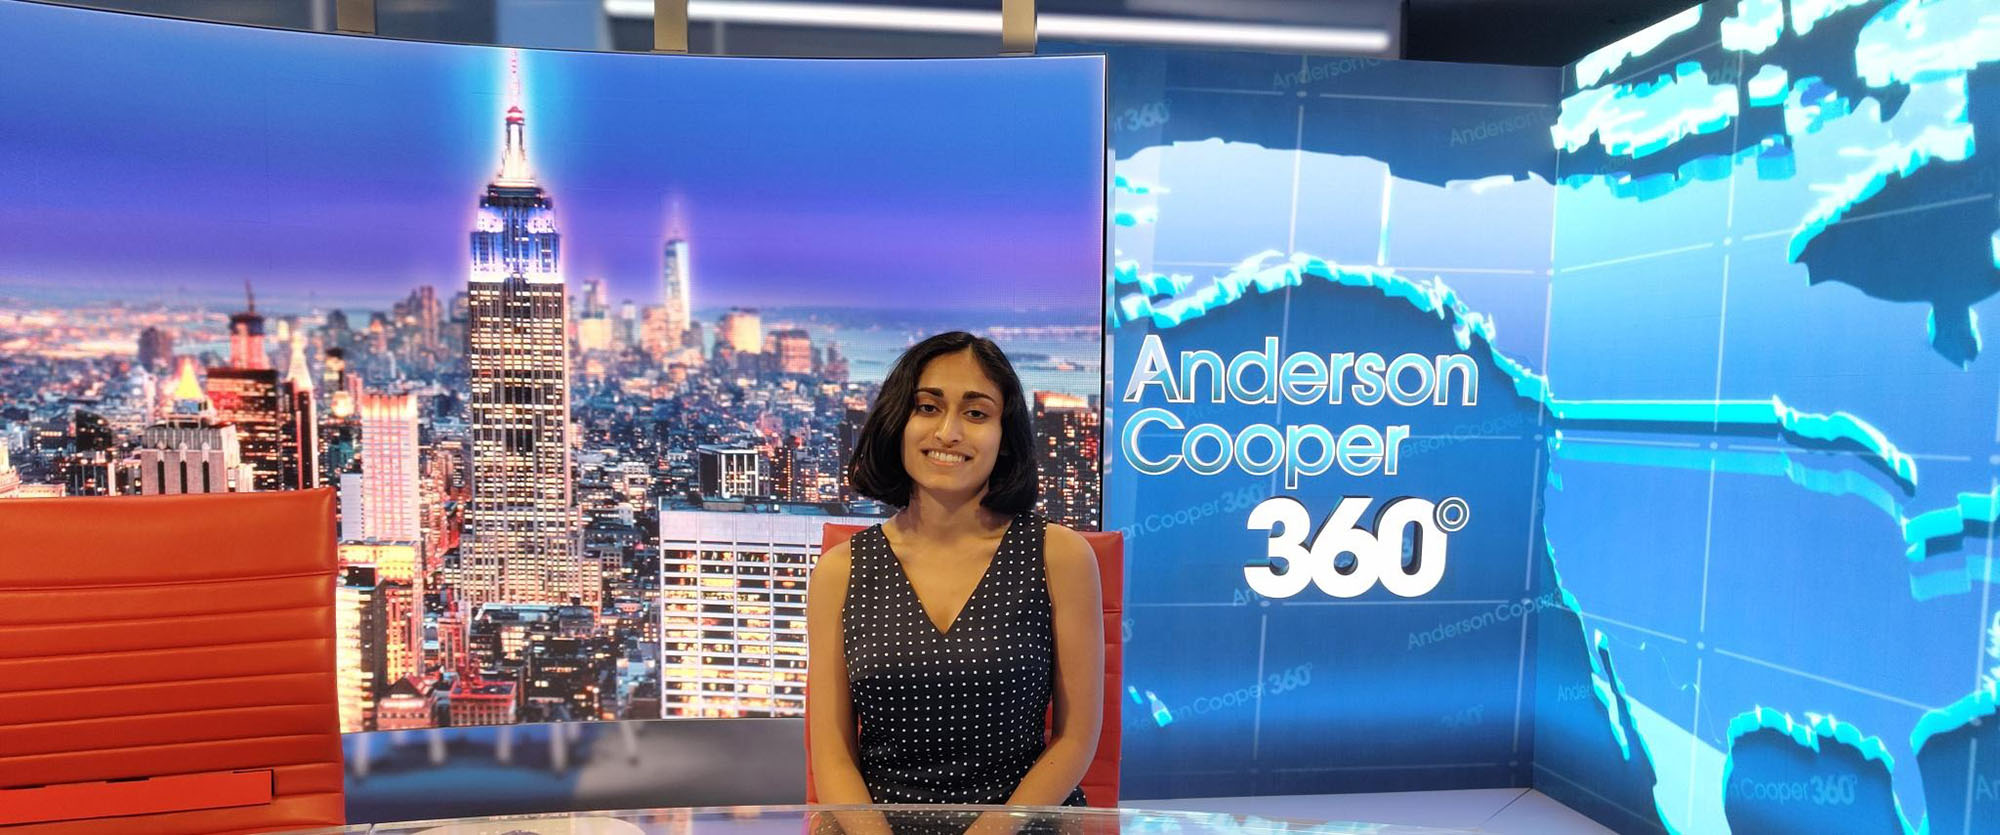 Photo: Madhri Yehiya, a young South Asian woman with short black hair and wearing a black blouse sits at a news desk in the Anderson Cooper 360 Studio. The large screen behind her displays the words "Anderson Cooper 360".